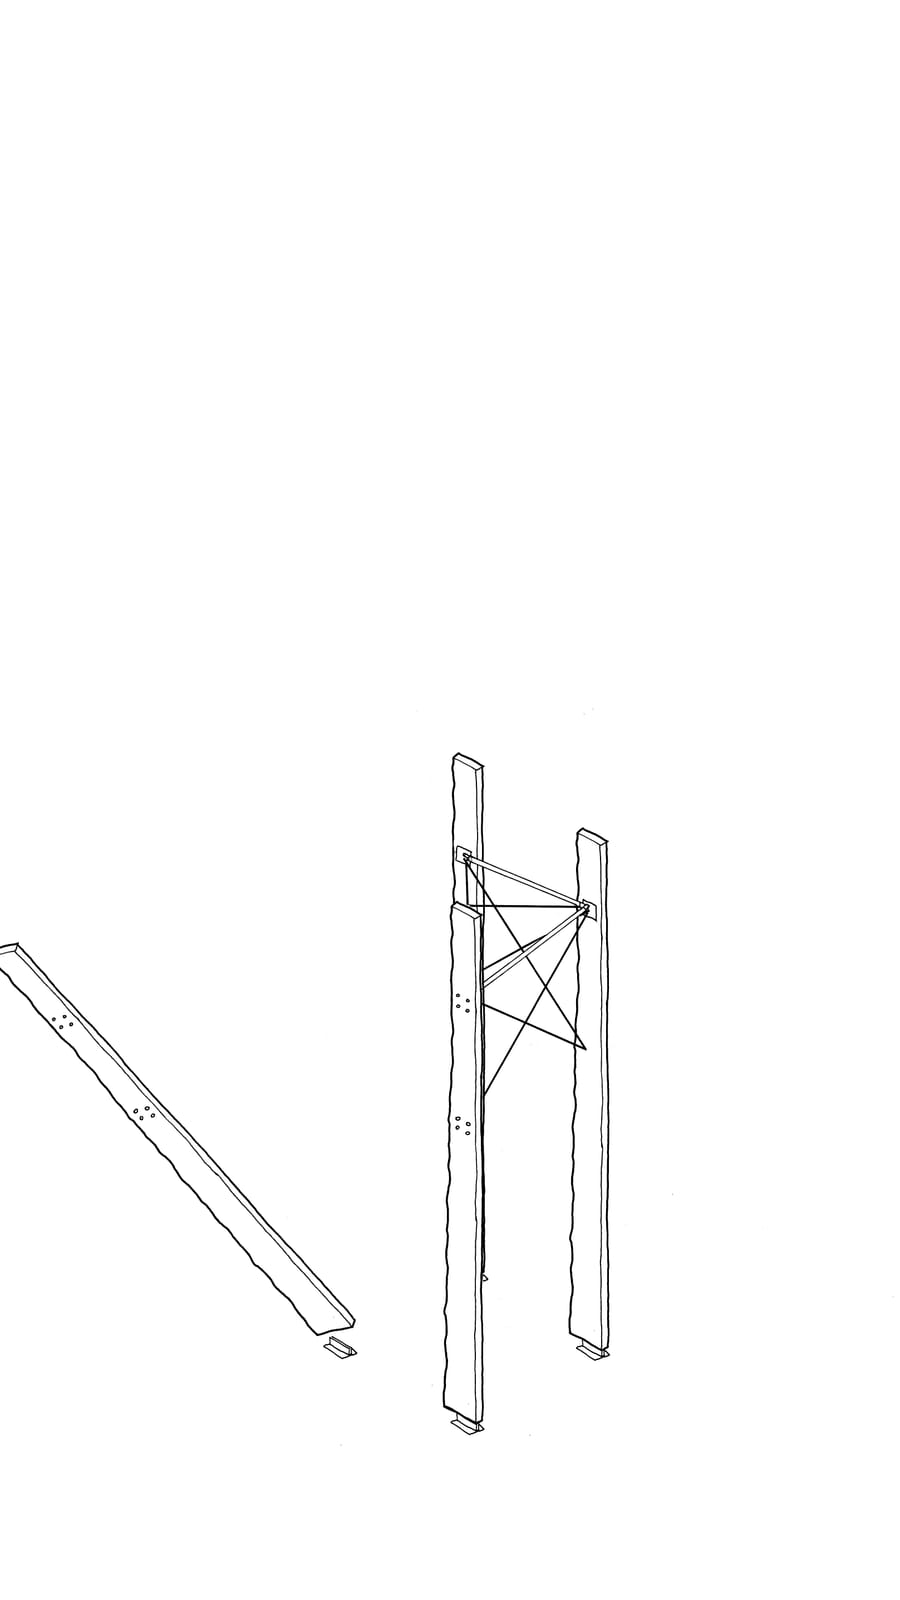 Black line sketch of 3 timber lengths stood tall with 1 being taken away